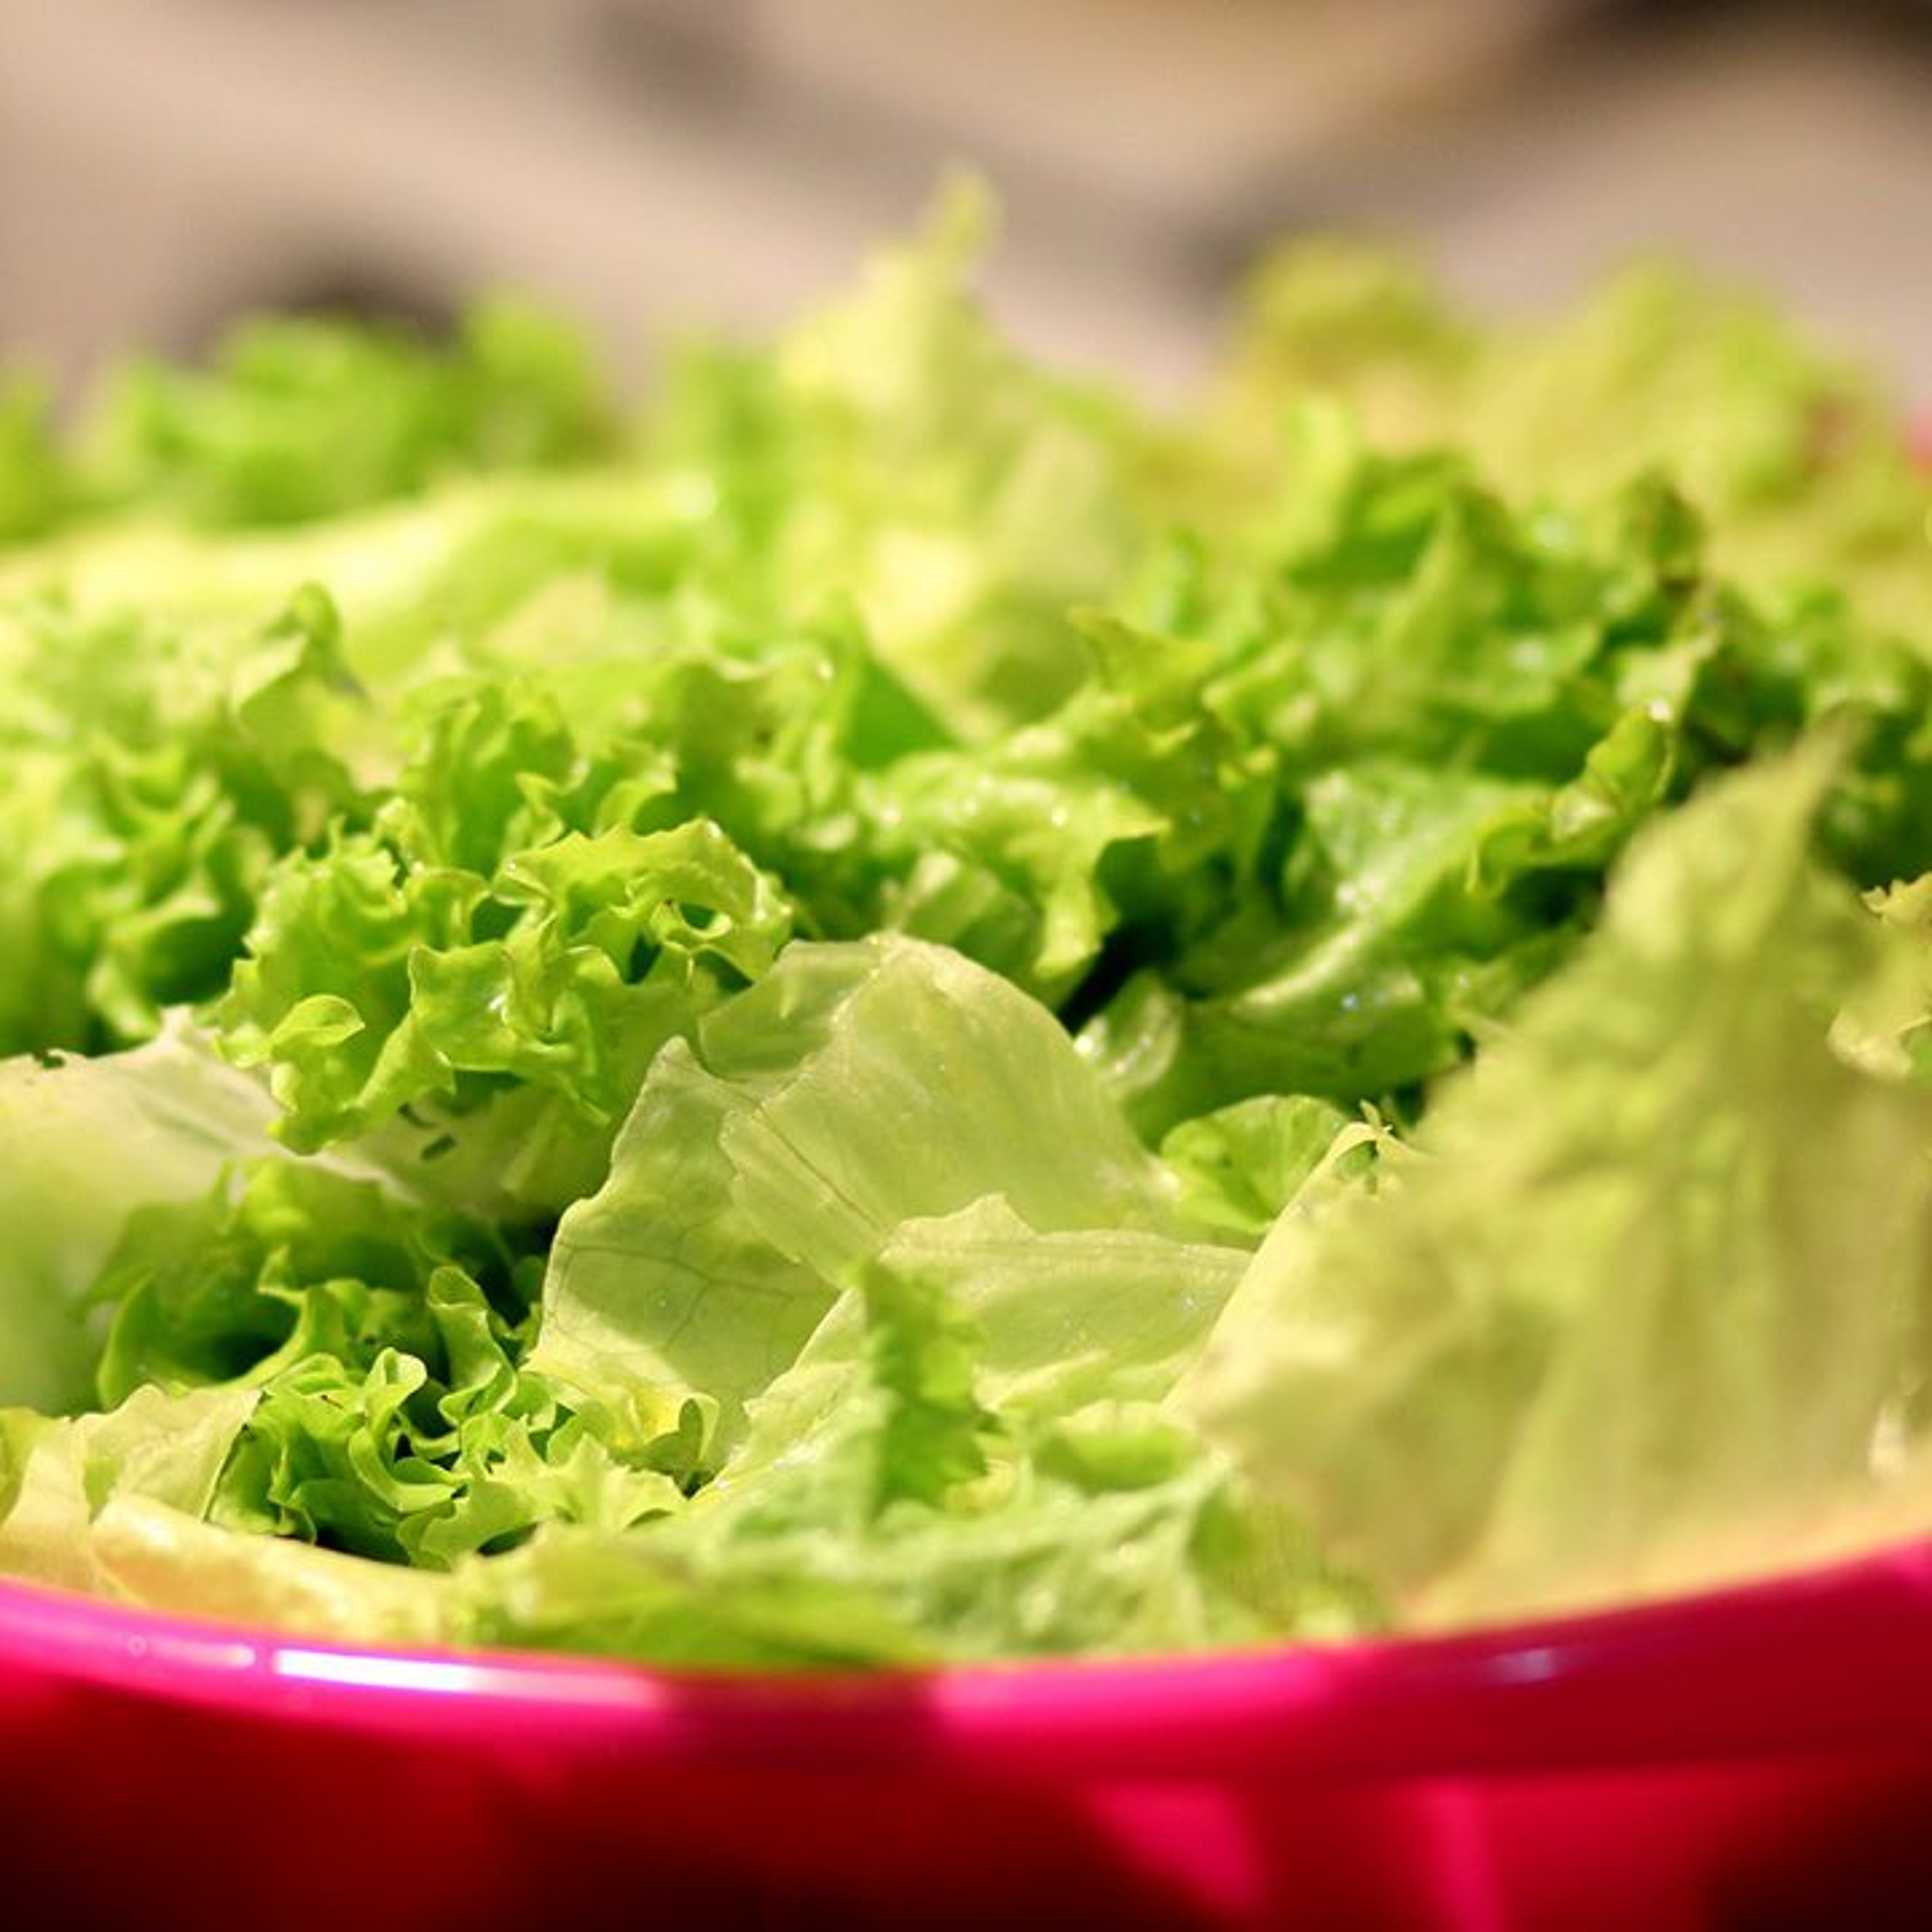 Ep. 16: Growth Opportunity - How AI Puts Lettuce in Your Salad Bowl